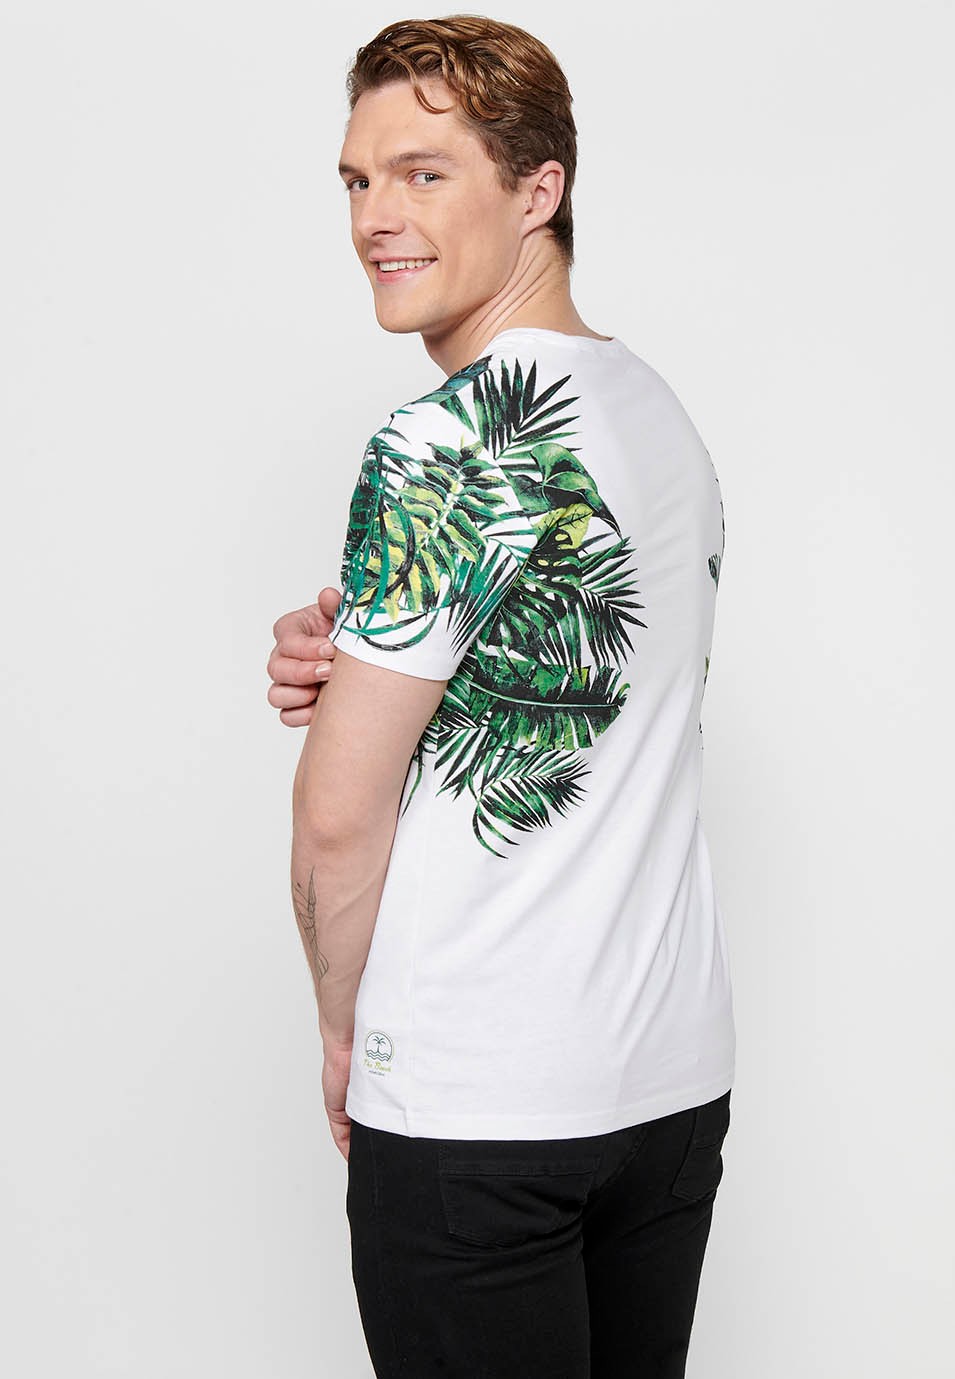 Short Sleeve T-Shirt, Tropical Print and Front Letters, White for Men